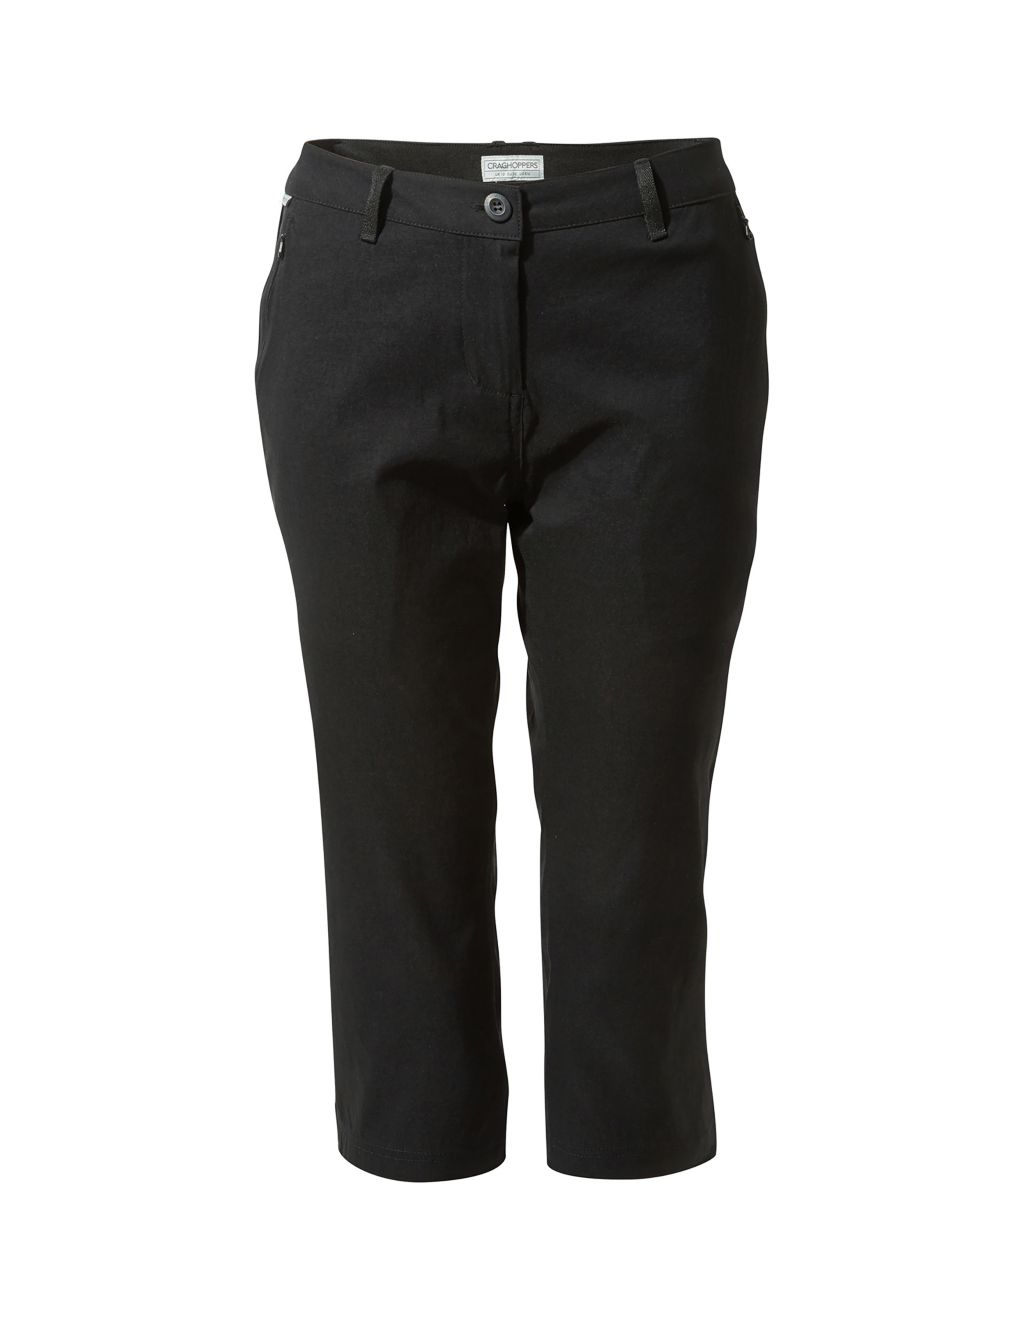 Tapered Cropped Walking Trousers image 2